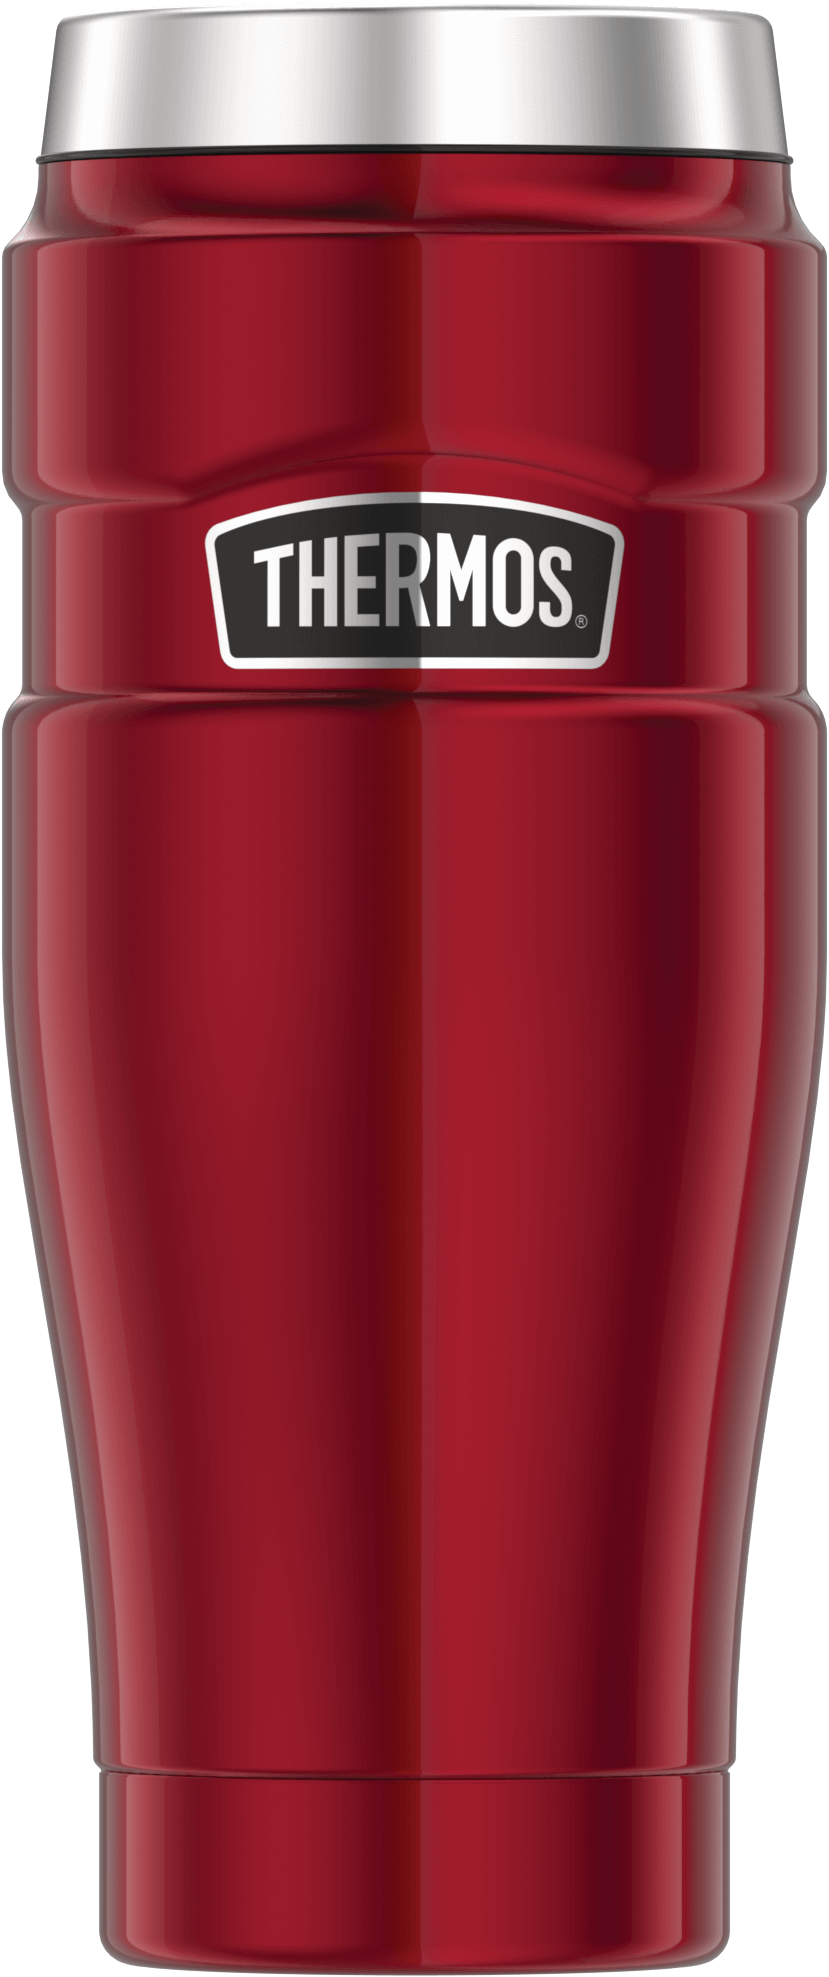 Cranberry/Navy Thermos Vacuum Insulated Stainless Steel Travel Mug Pair 16oz 